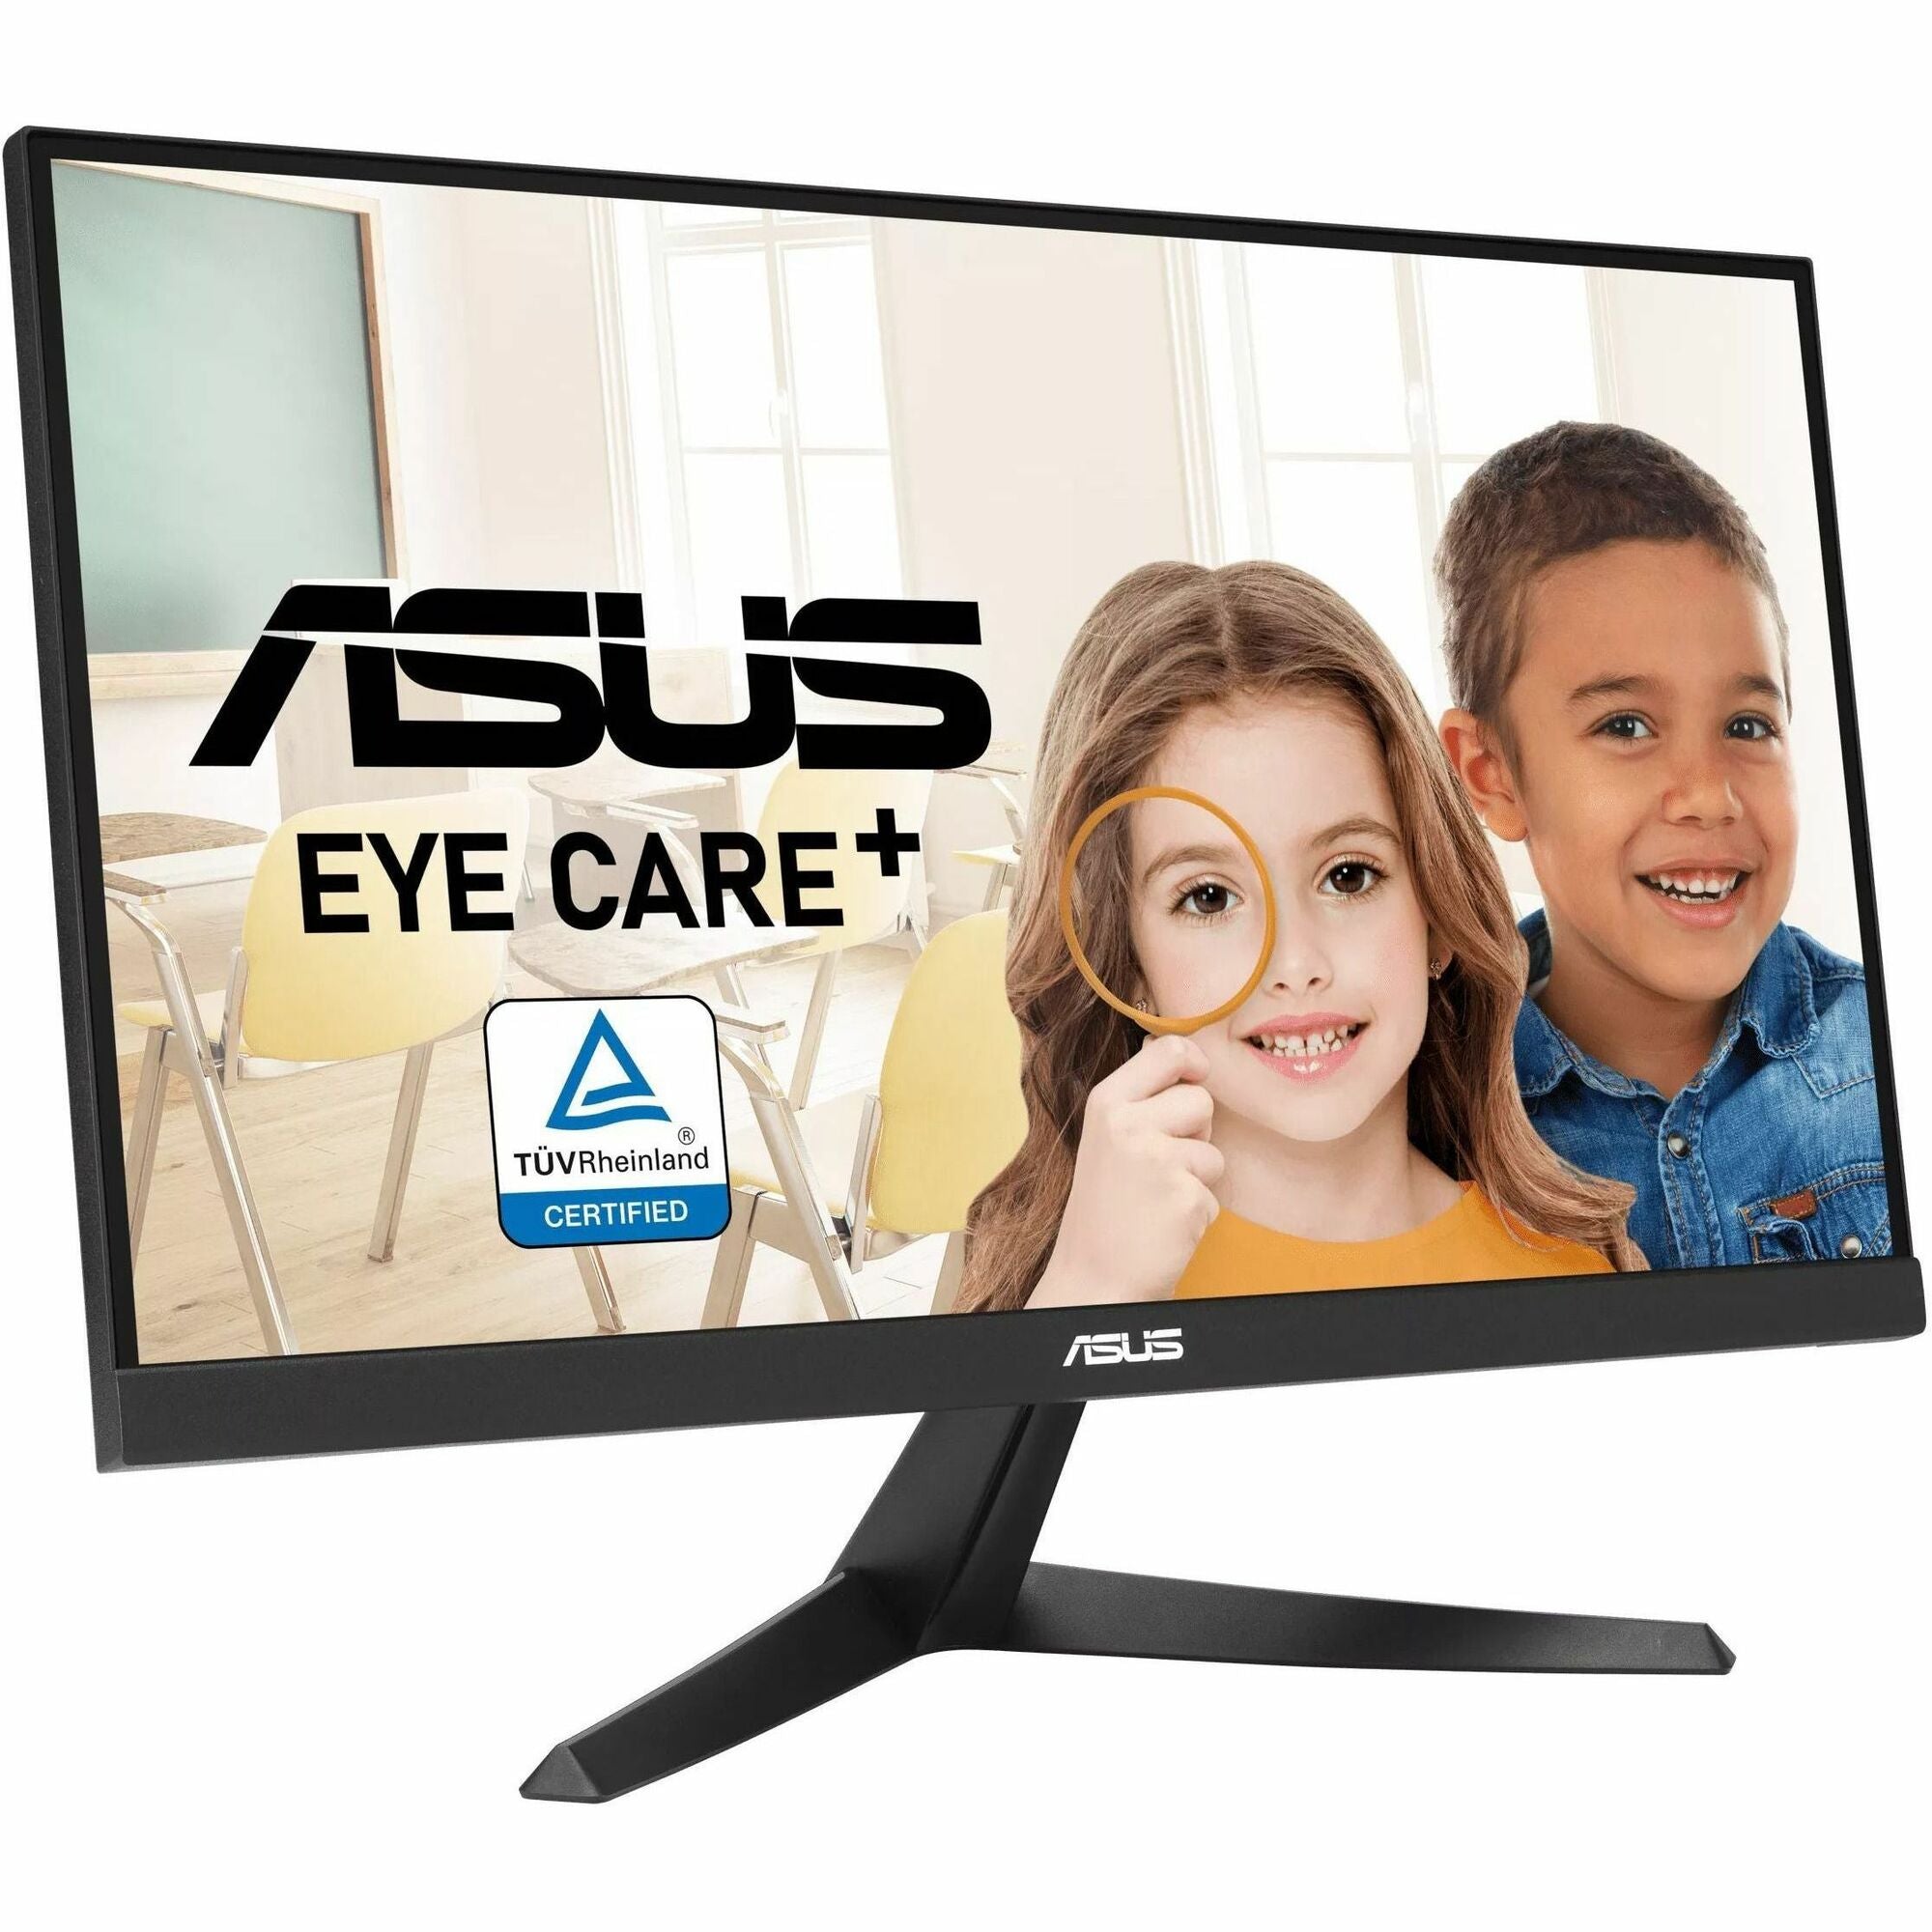 Asus VY229HE 22" Class Full HD LED Monitor - 16:9 - VY229HE